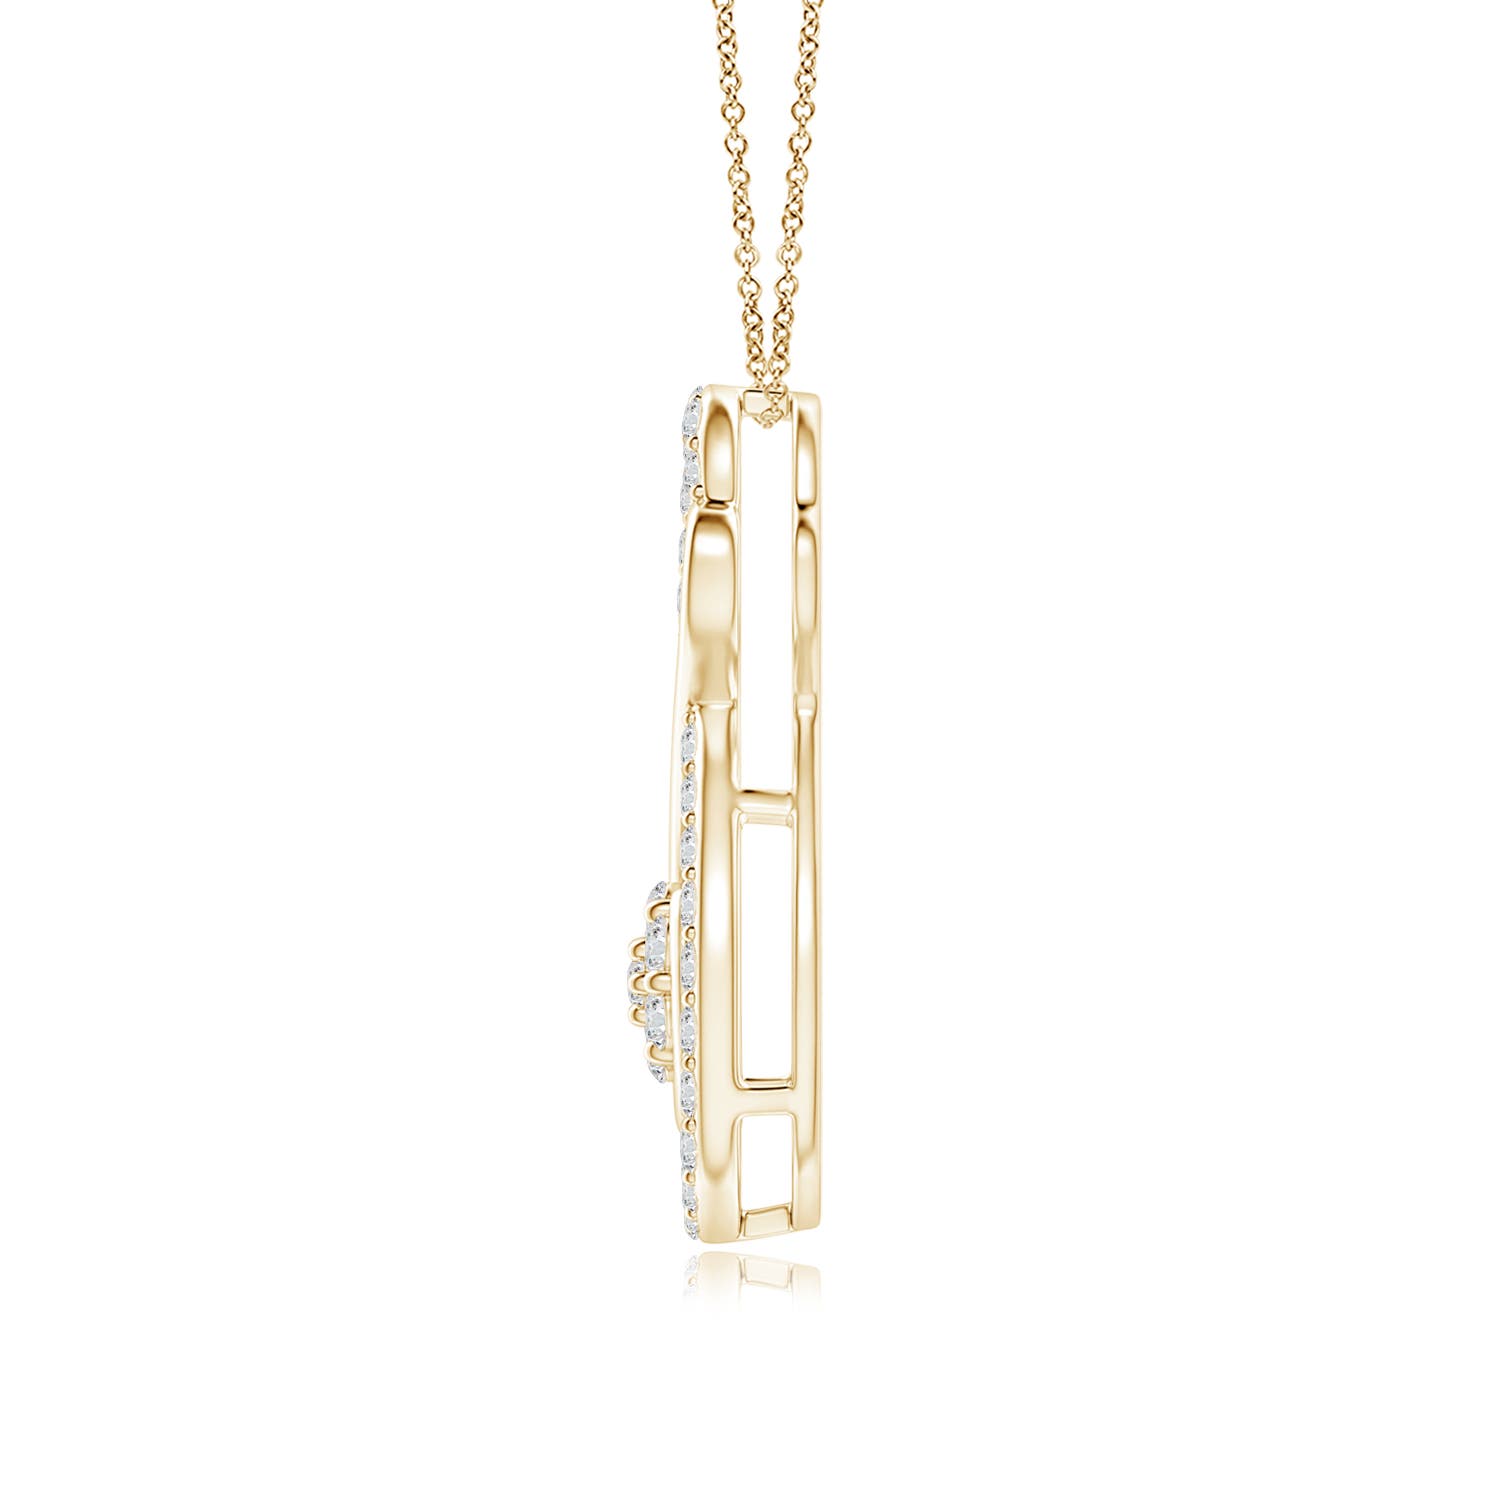 H, SI2 / 0.24 CT / 14 KT Yellow Gold